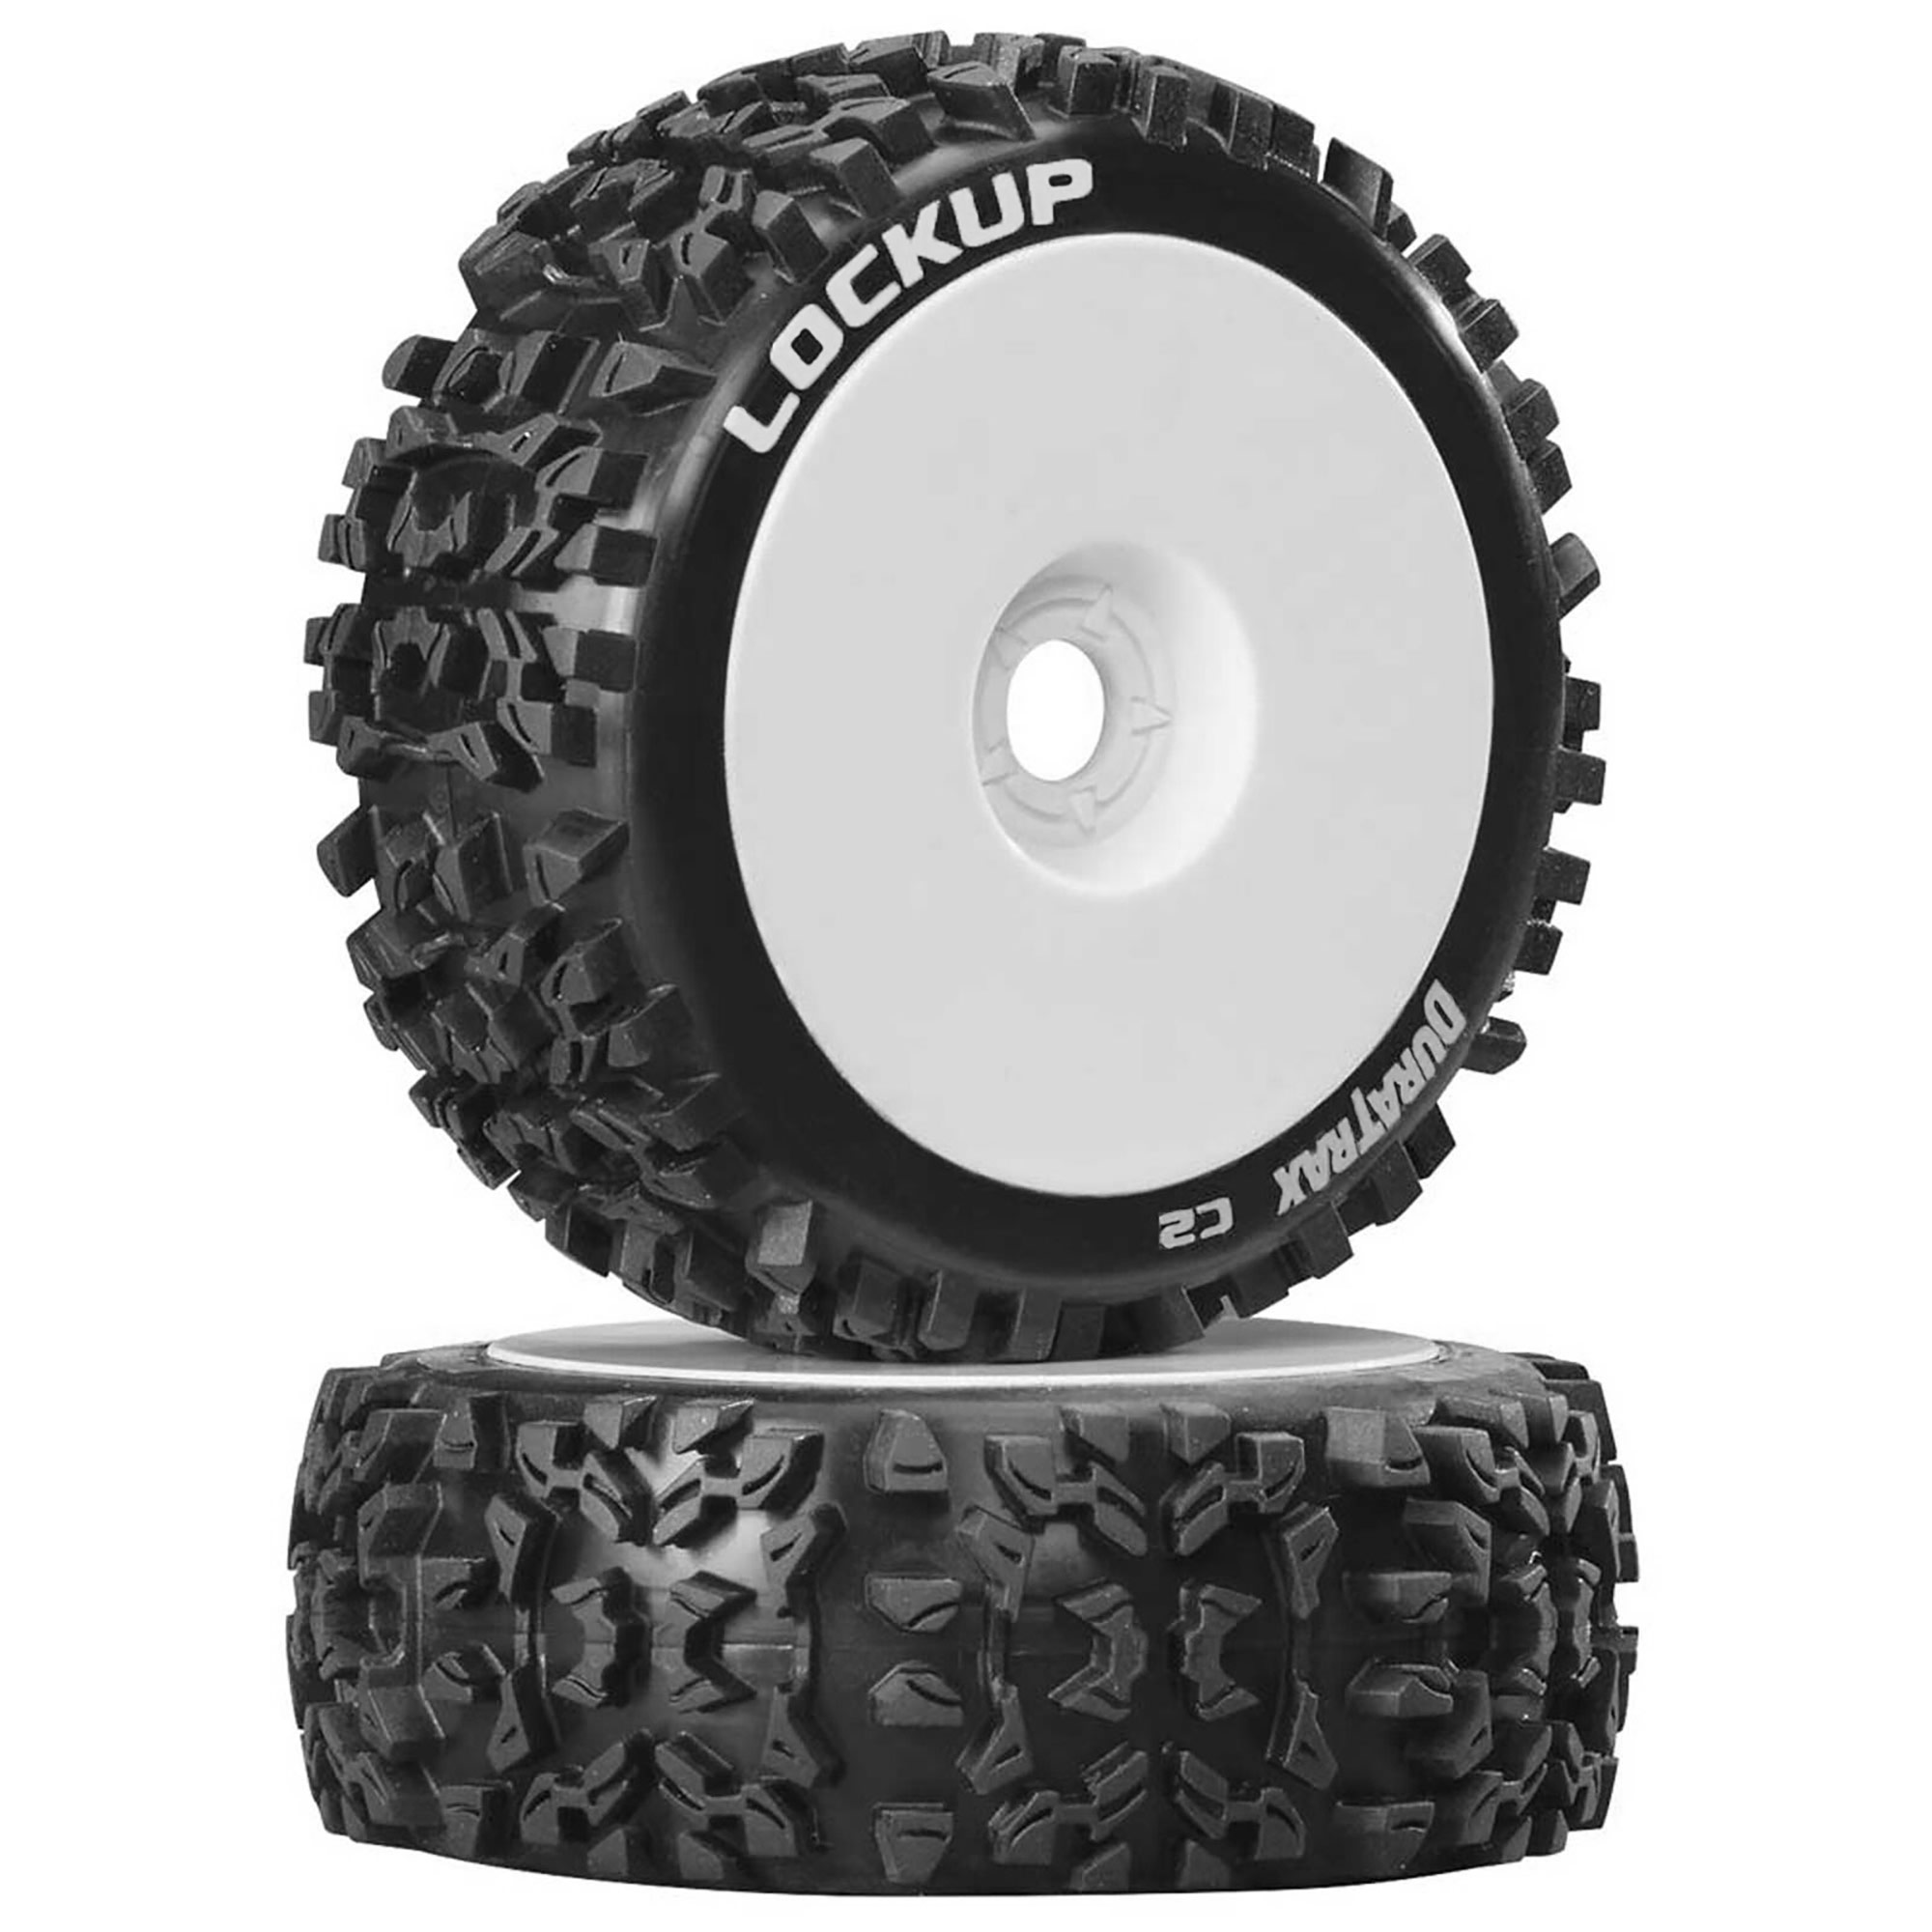 Duratrax 1/8 Lockup Buggy Tire C2 Mounted White 2 DTXC3615 RC Tire - image 1 of 2